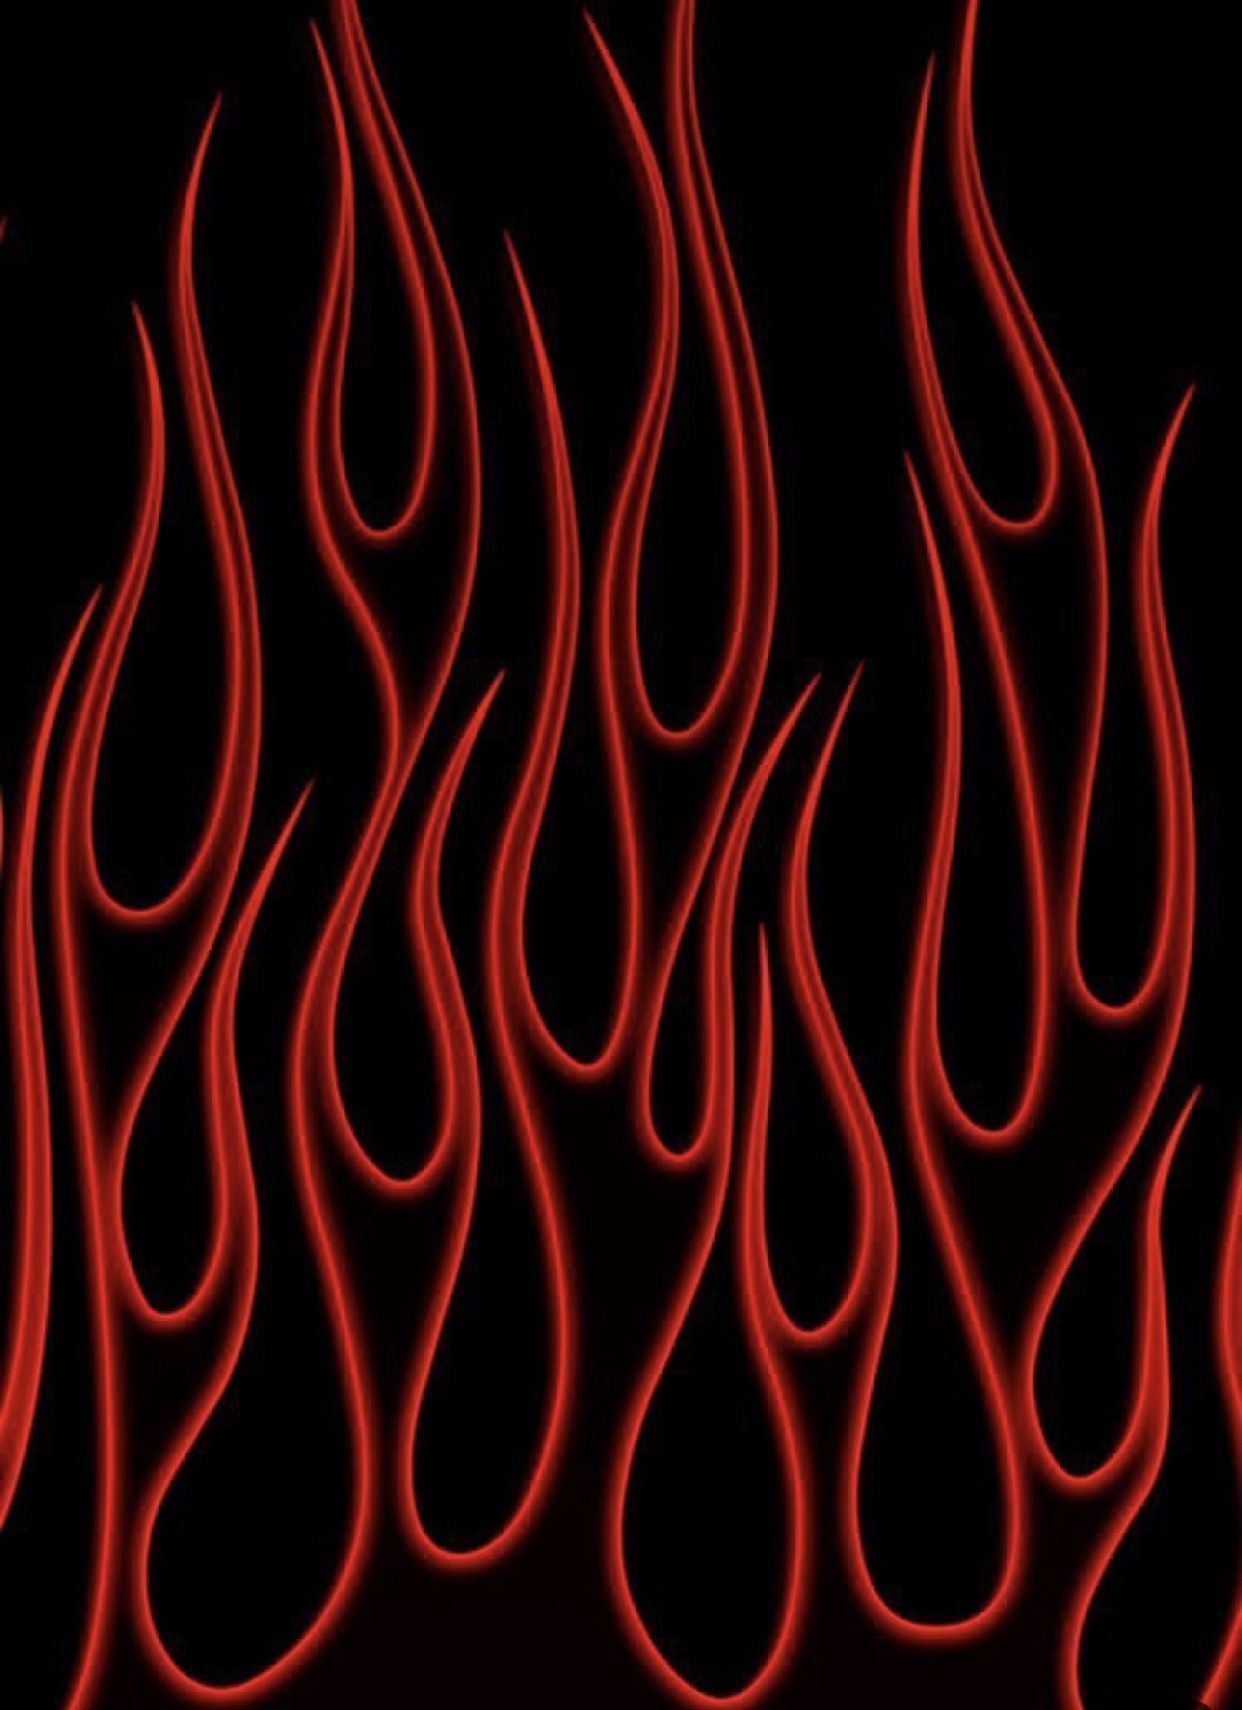 Red flames on a black background - Fire, flames